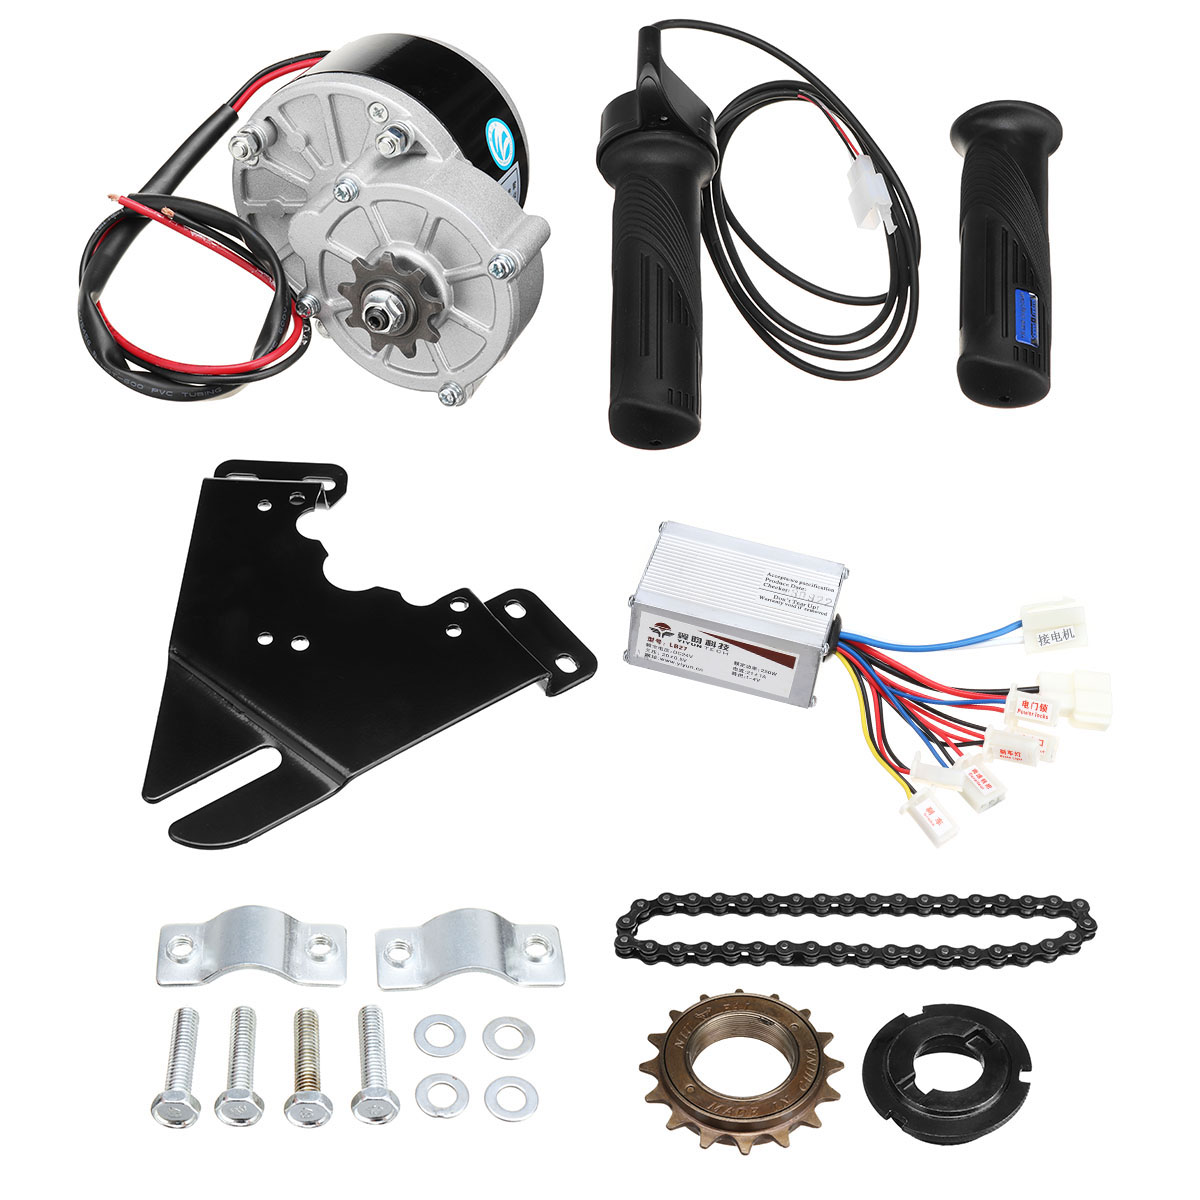 24V 250W Electric Bike Conversion Scooter Motor Controller Kit Fit for 20-28Inch Ordinary Bike - Auto GoShop